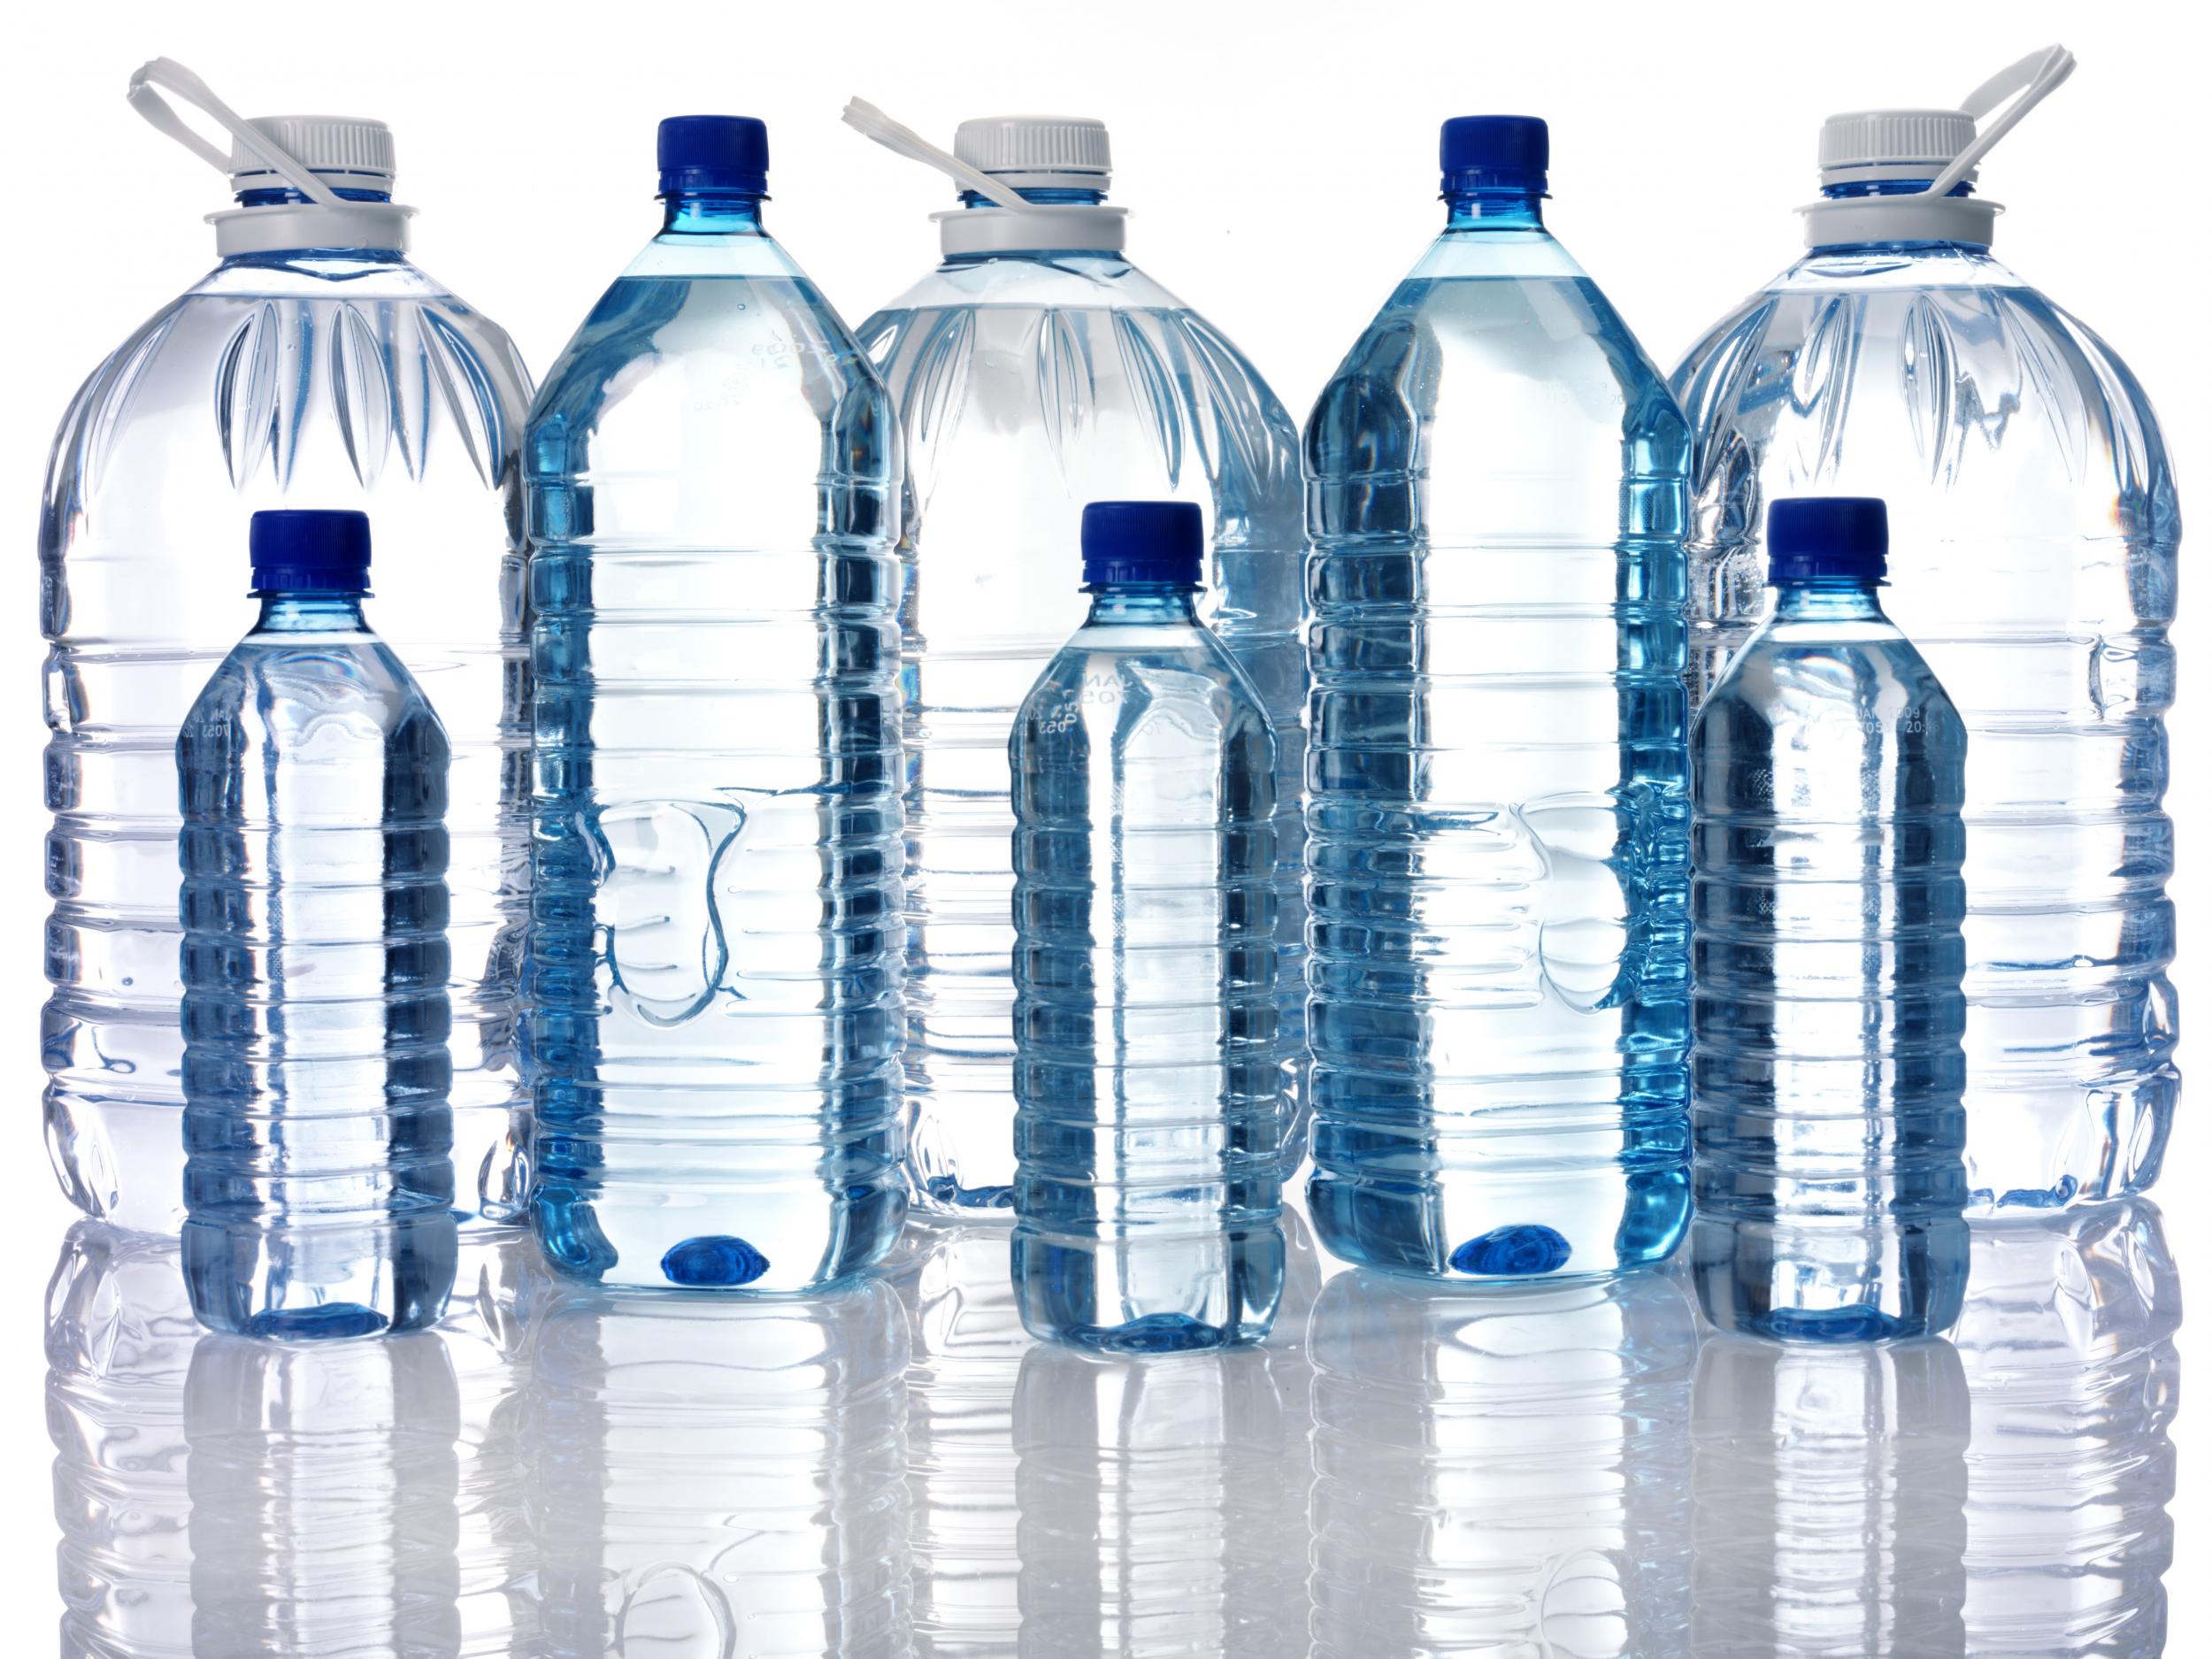 Microplastic Flakes Found In Almost All Bottles Of Mineral Water On